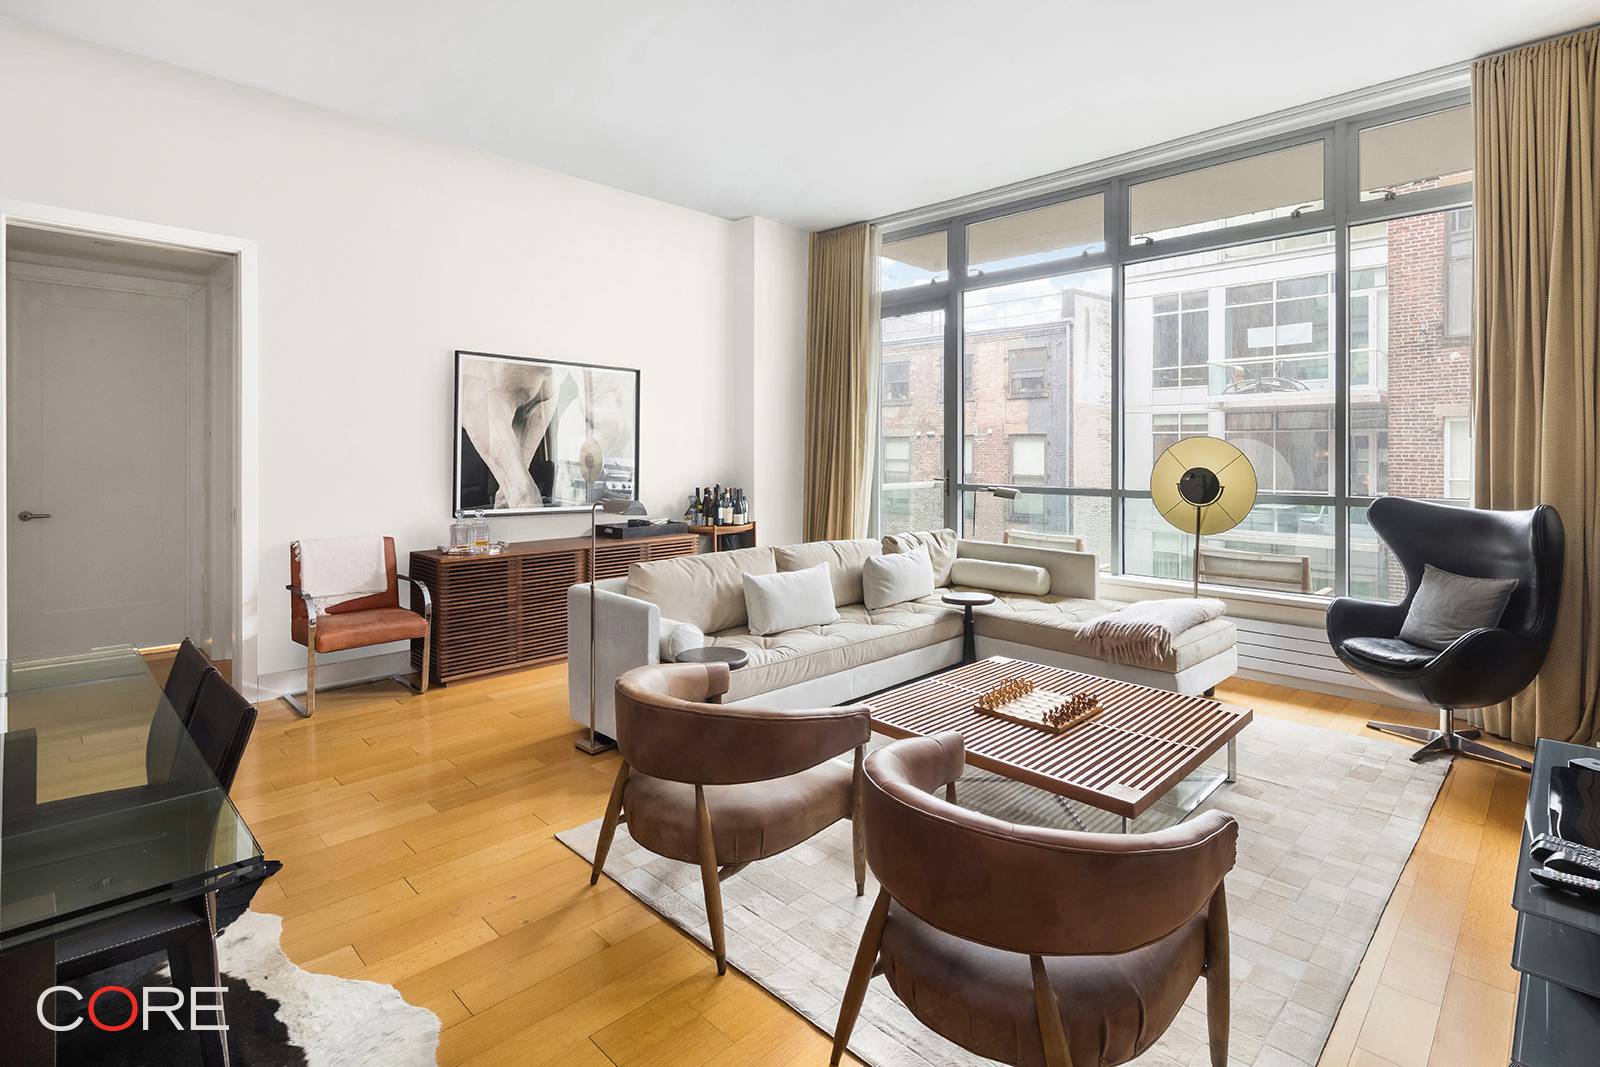 Nestled along one of SoHo's most sought after blocks is an opportunity to own a luxurious and modern two bedroom, two bathroom home which shares the floor with only one ...